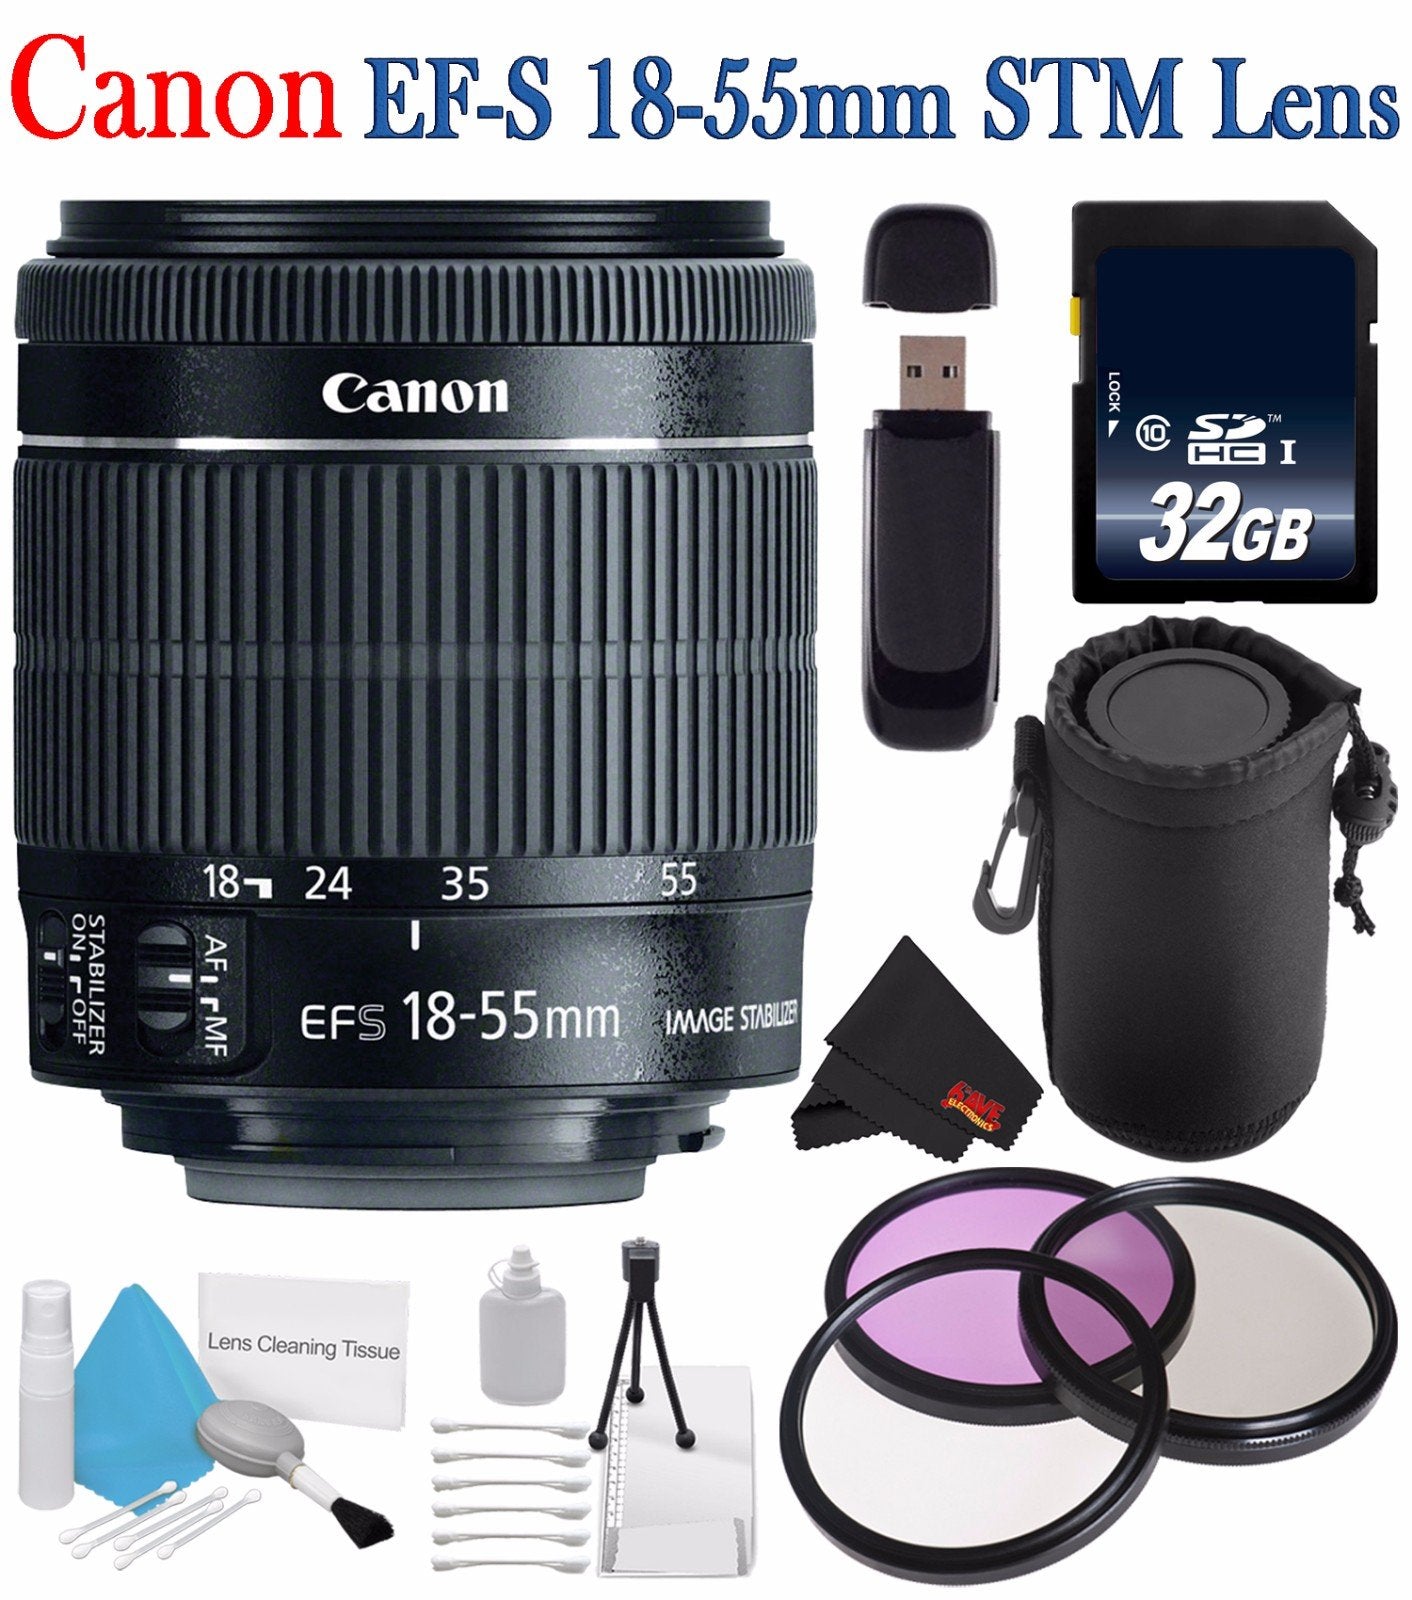 Canon EF-S 18-55mm f/3.5-5.6 IS STM Lens 8114B002 + 58mm 3 Piece Filter Kit + SD Card USB Reader + Deluxe Lens Pouch Bundle